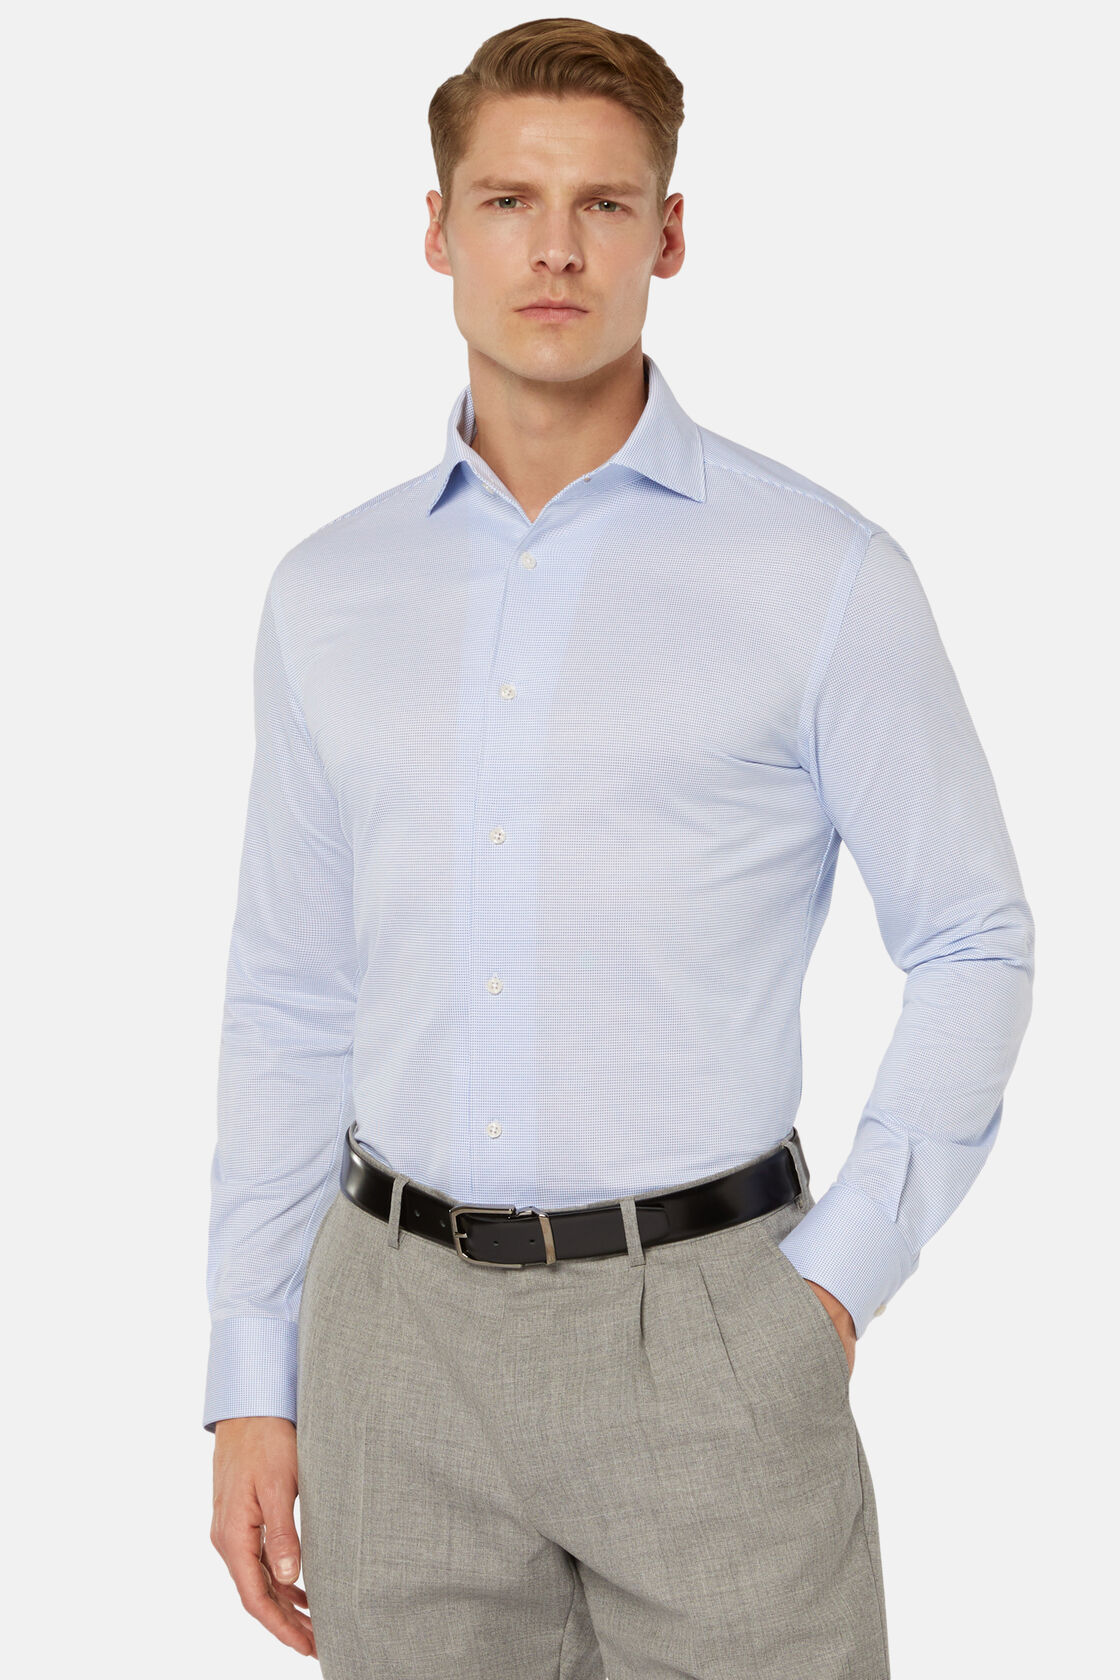 Polo Camicia In Jersey Giapponese Regular Fit, Azzurro, hi-res